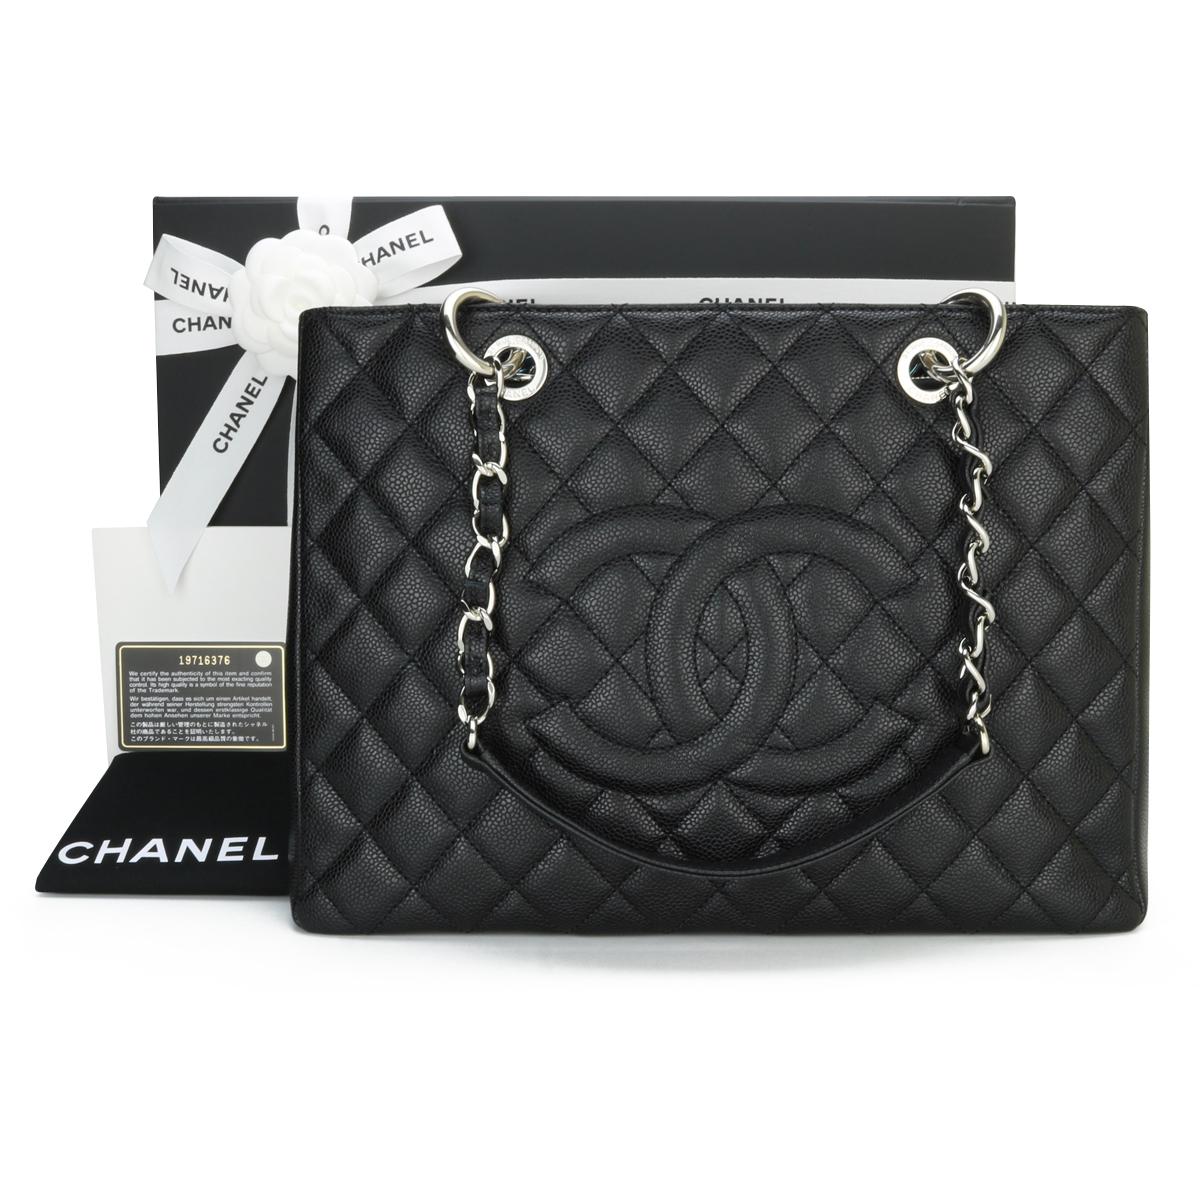 CHANEL Grand Shopping Tote (GST) Black Caviar with Silver Hardware 2015.

This bag is in pristine condition, the bag still holds its original shape, and the hardware is still very shiny.

As Chanel has discontinued the Grand Shopping Tote (GST), it